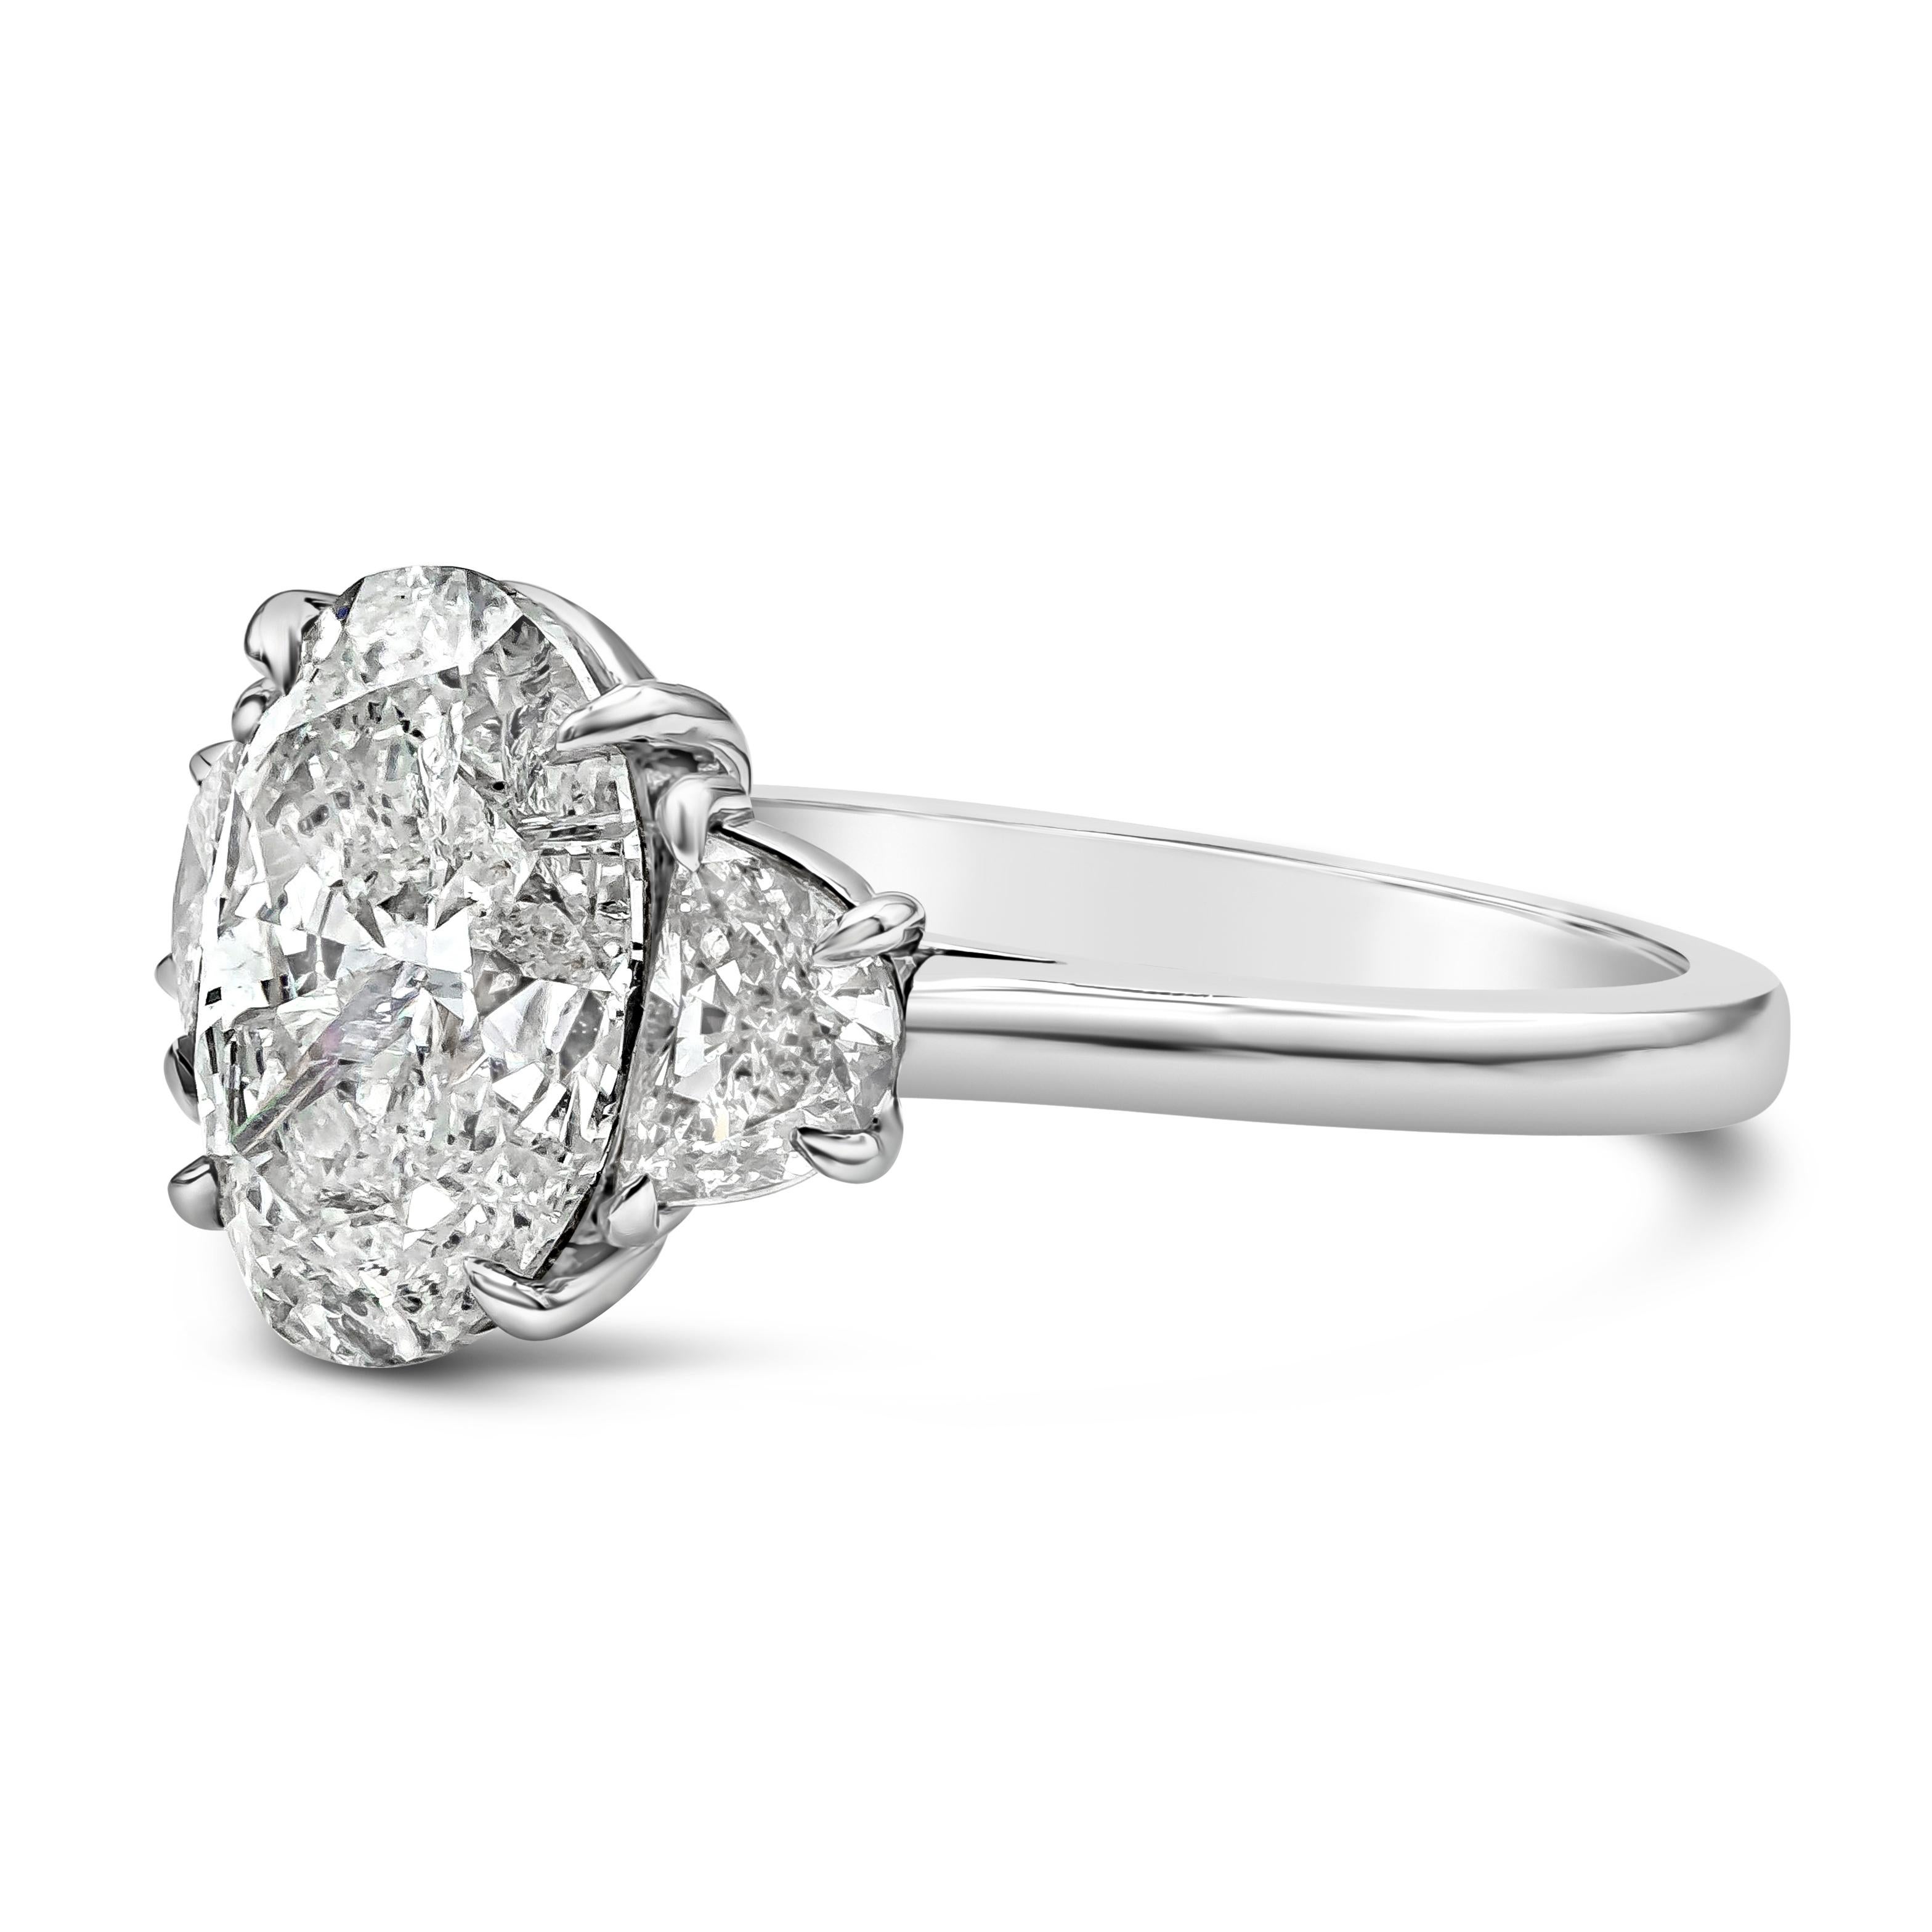 A classic and vibrant three-stone engagement ring, showcasing a 3.23 carats oval cut diamond certified by GIA as I Color and I2 clarity, set on a classic four claw prong basket setting. Flanked by two half moon shape diamonds weighing 0.69 carat